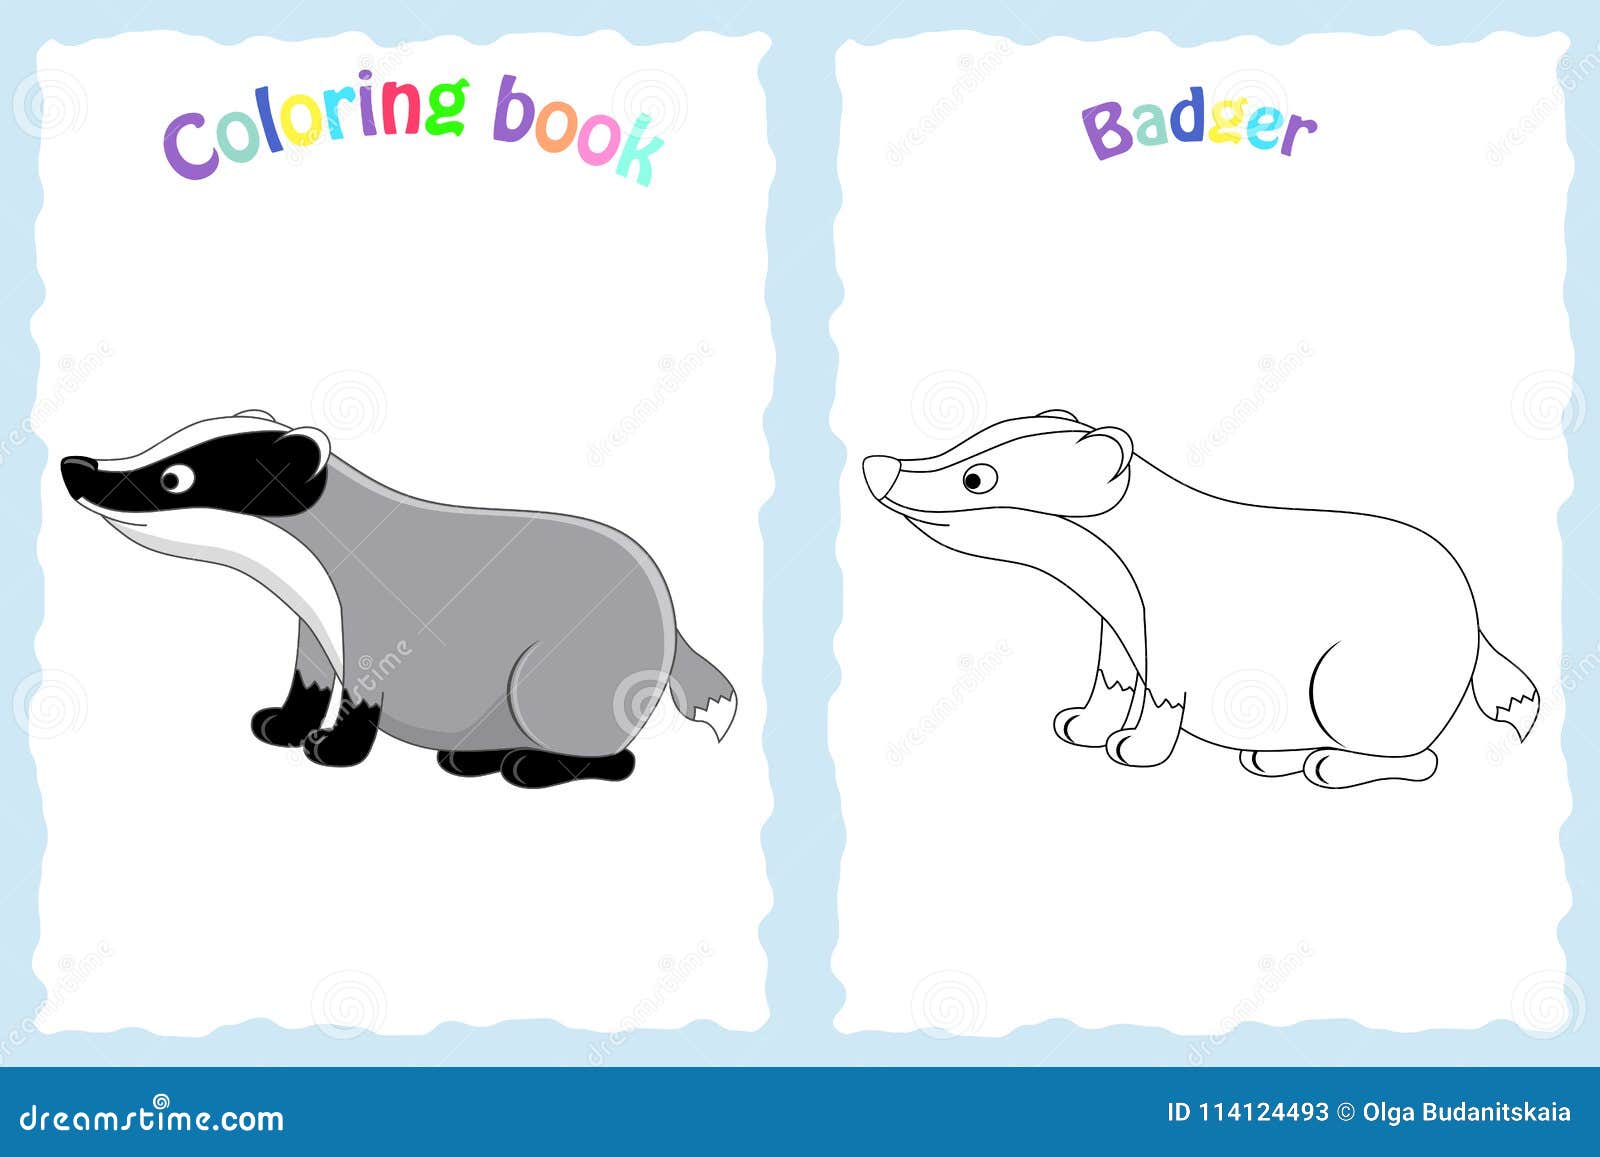 Coloring Book Page for Preschool Children with Colorful Badger a ...